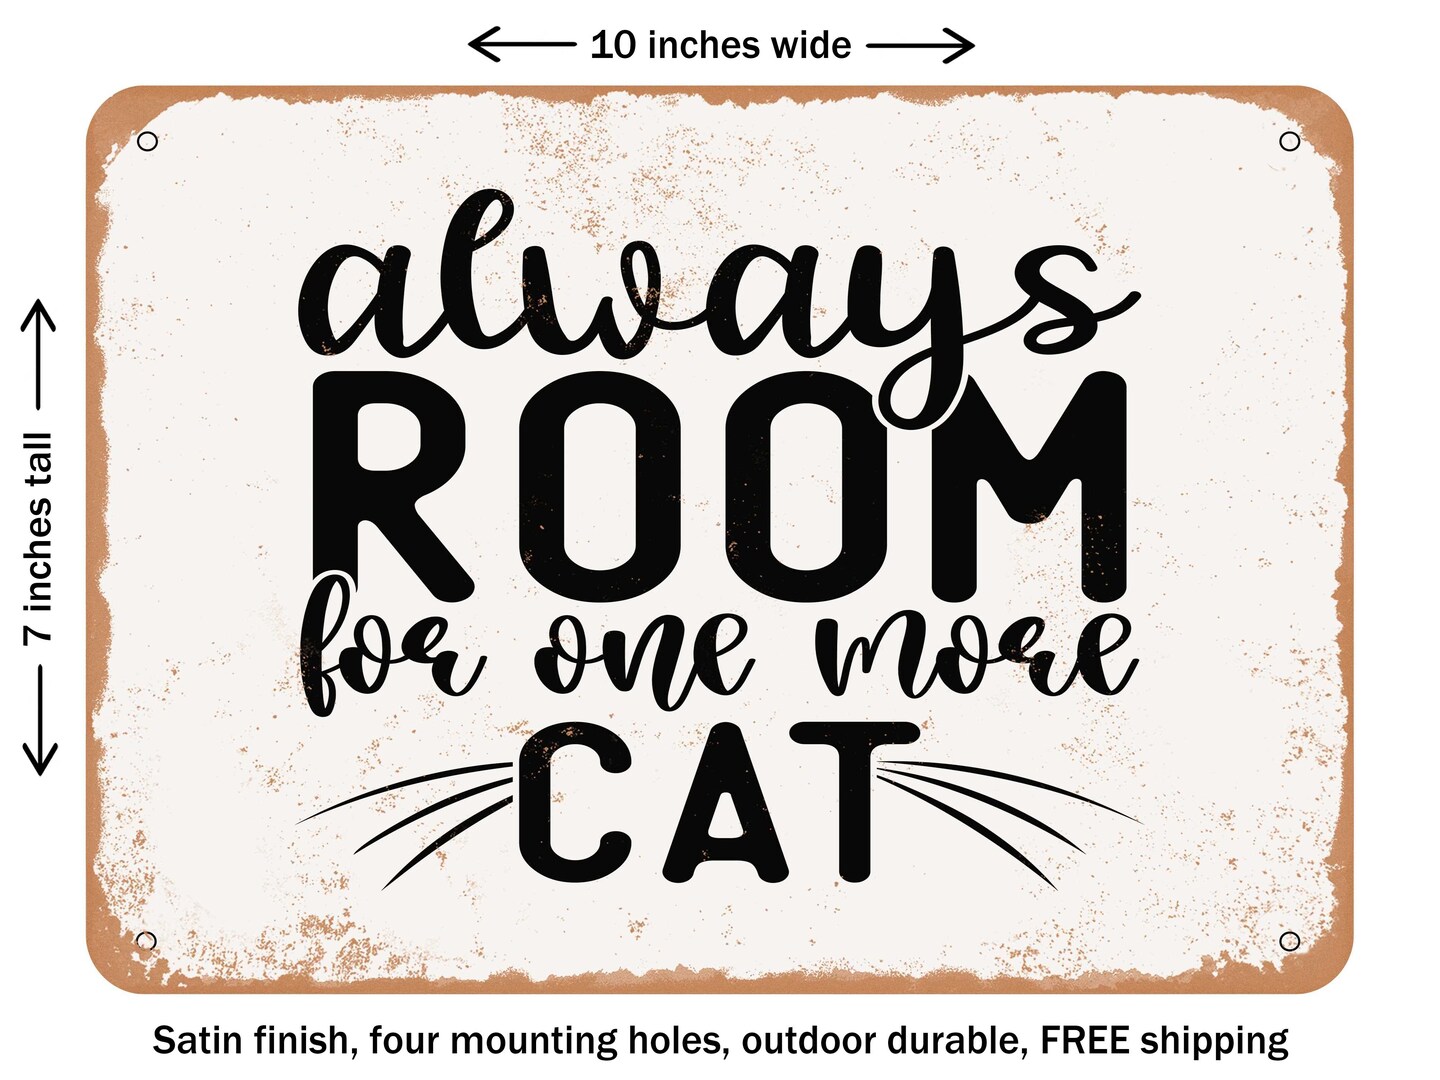 DECORATIVE METAL SIGN - Always Room For One More Cat - Vintage Rusty Look